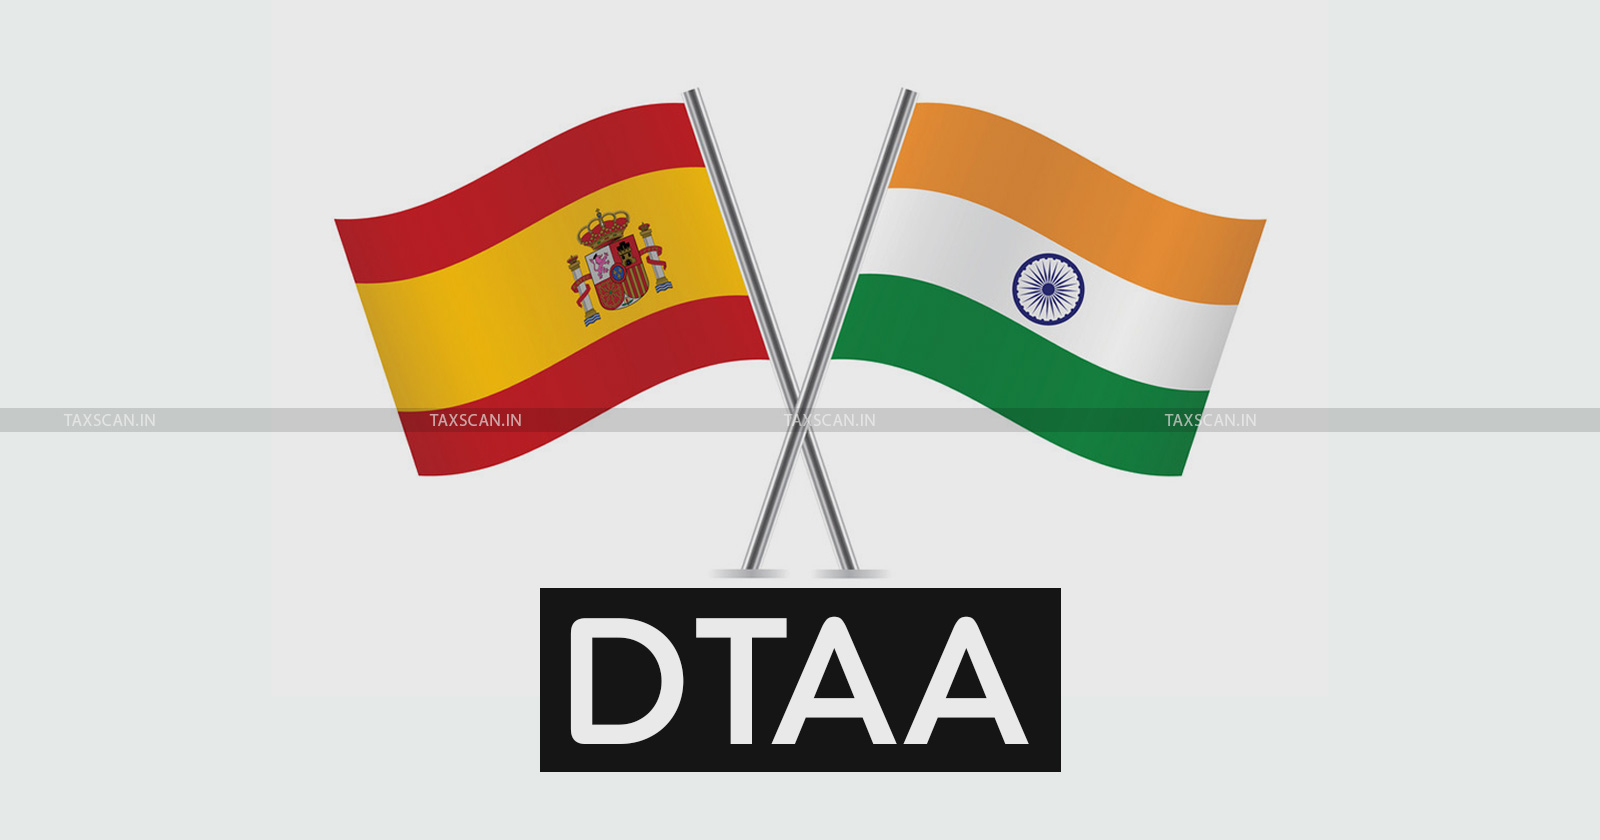 DTAA - Royalties - Fees for Technical Services - India Spain DTAA - TAXSCAN